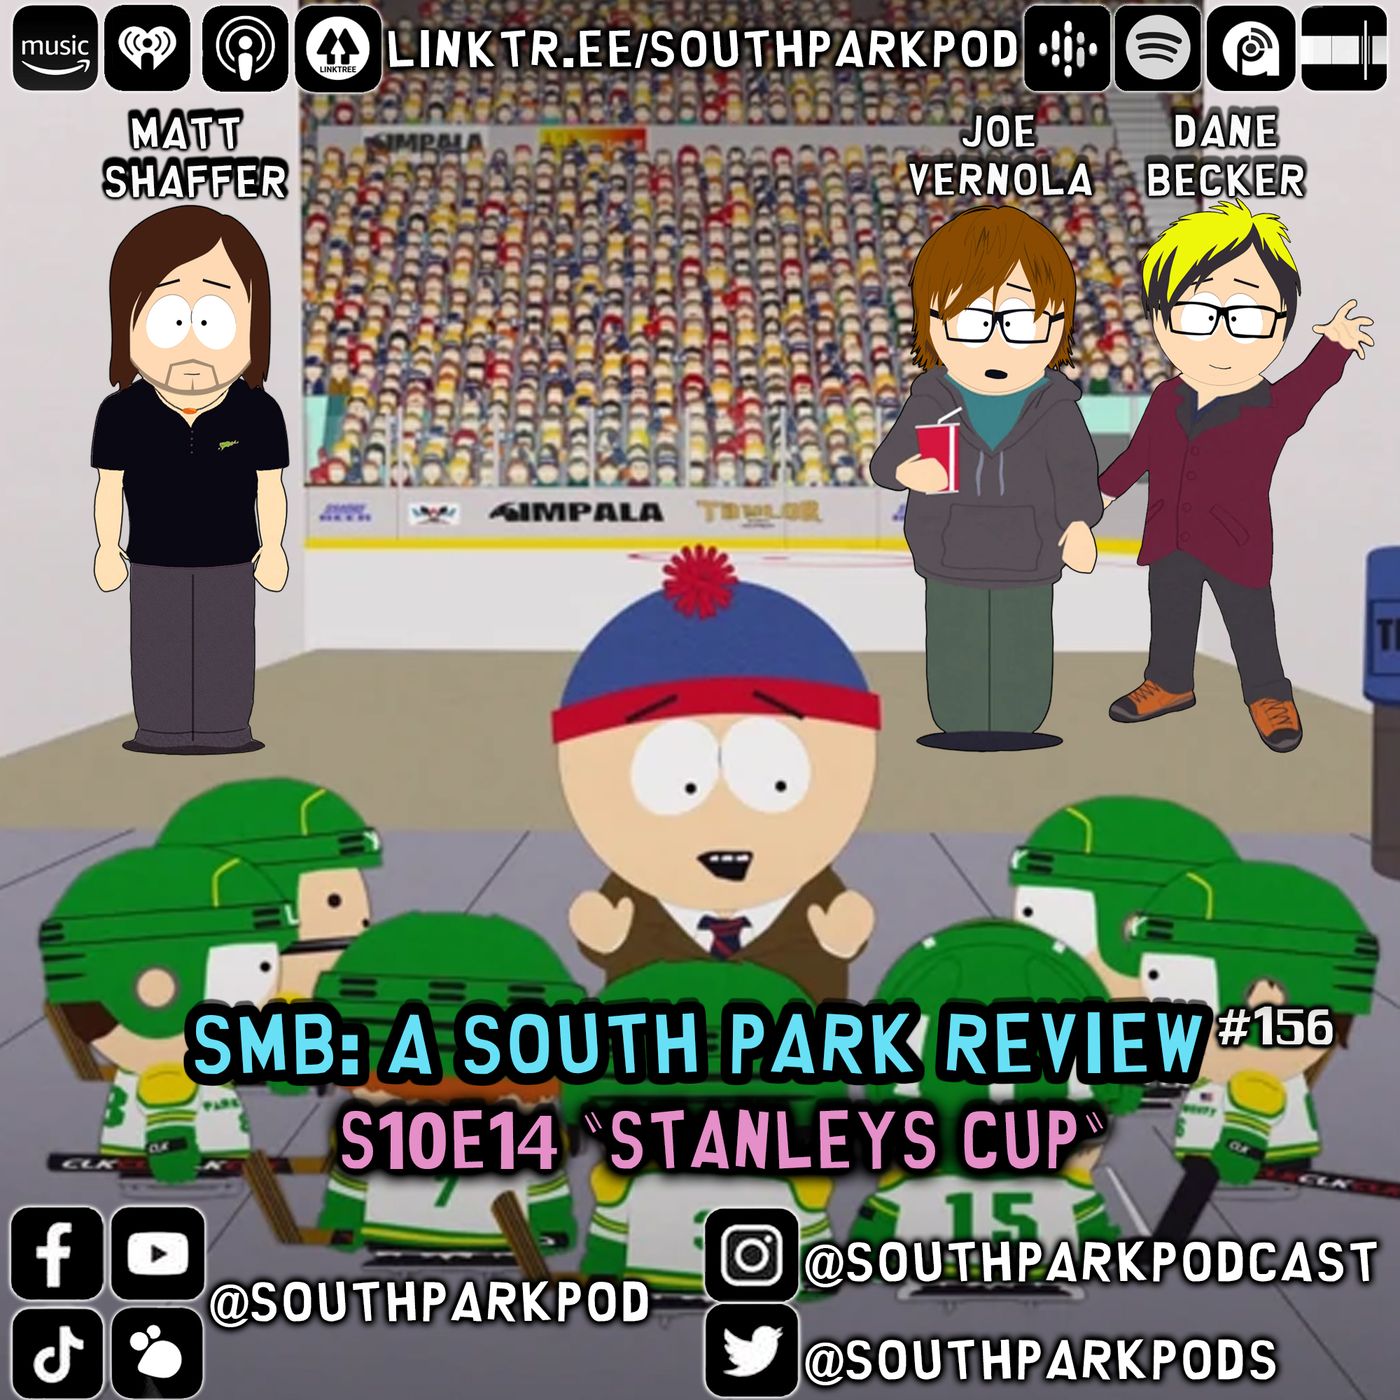 SMB #156 - S10 E14 Stanleys Cup - 